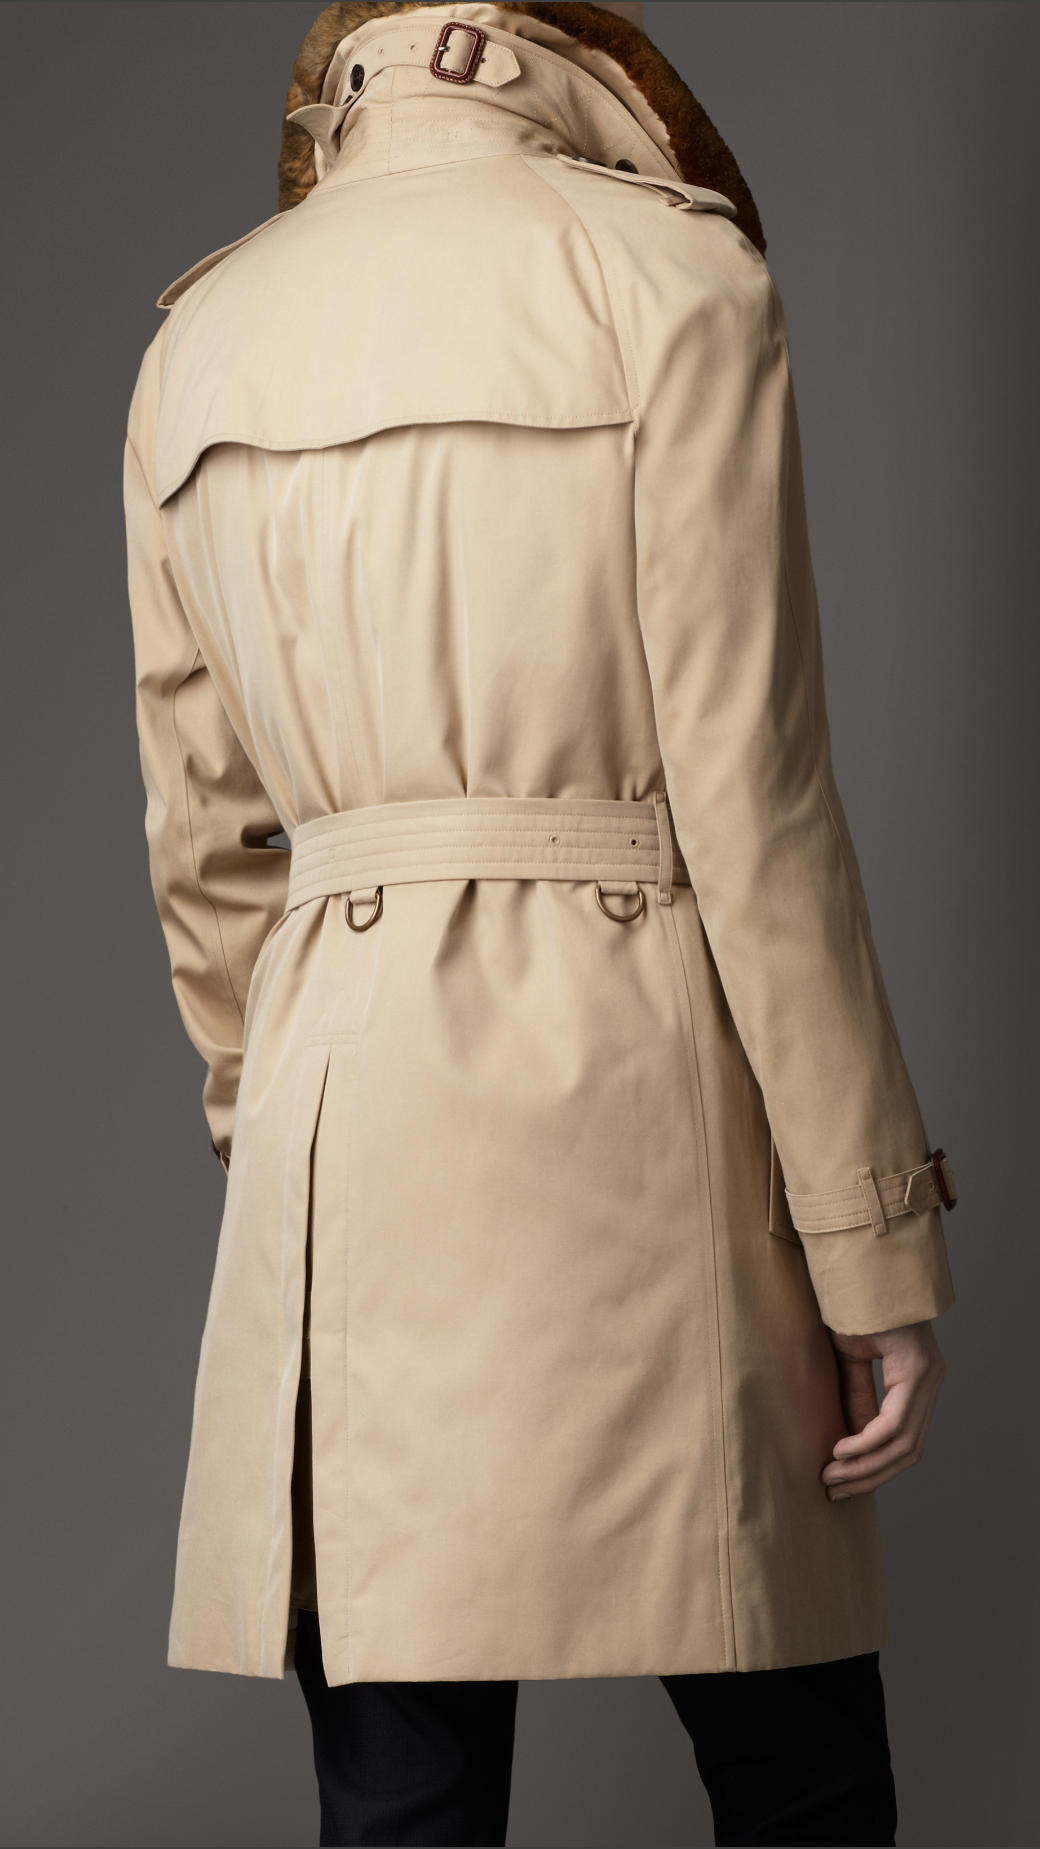 Burberry Midlength Cotton Gabardine Trench Coat in Natural for Men - Lyst